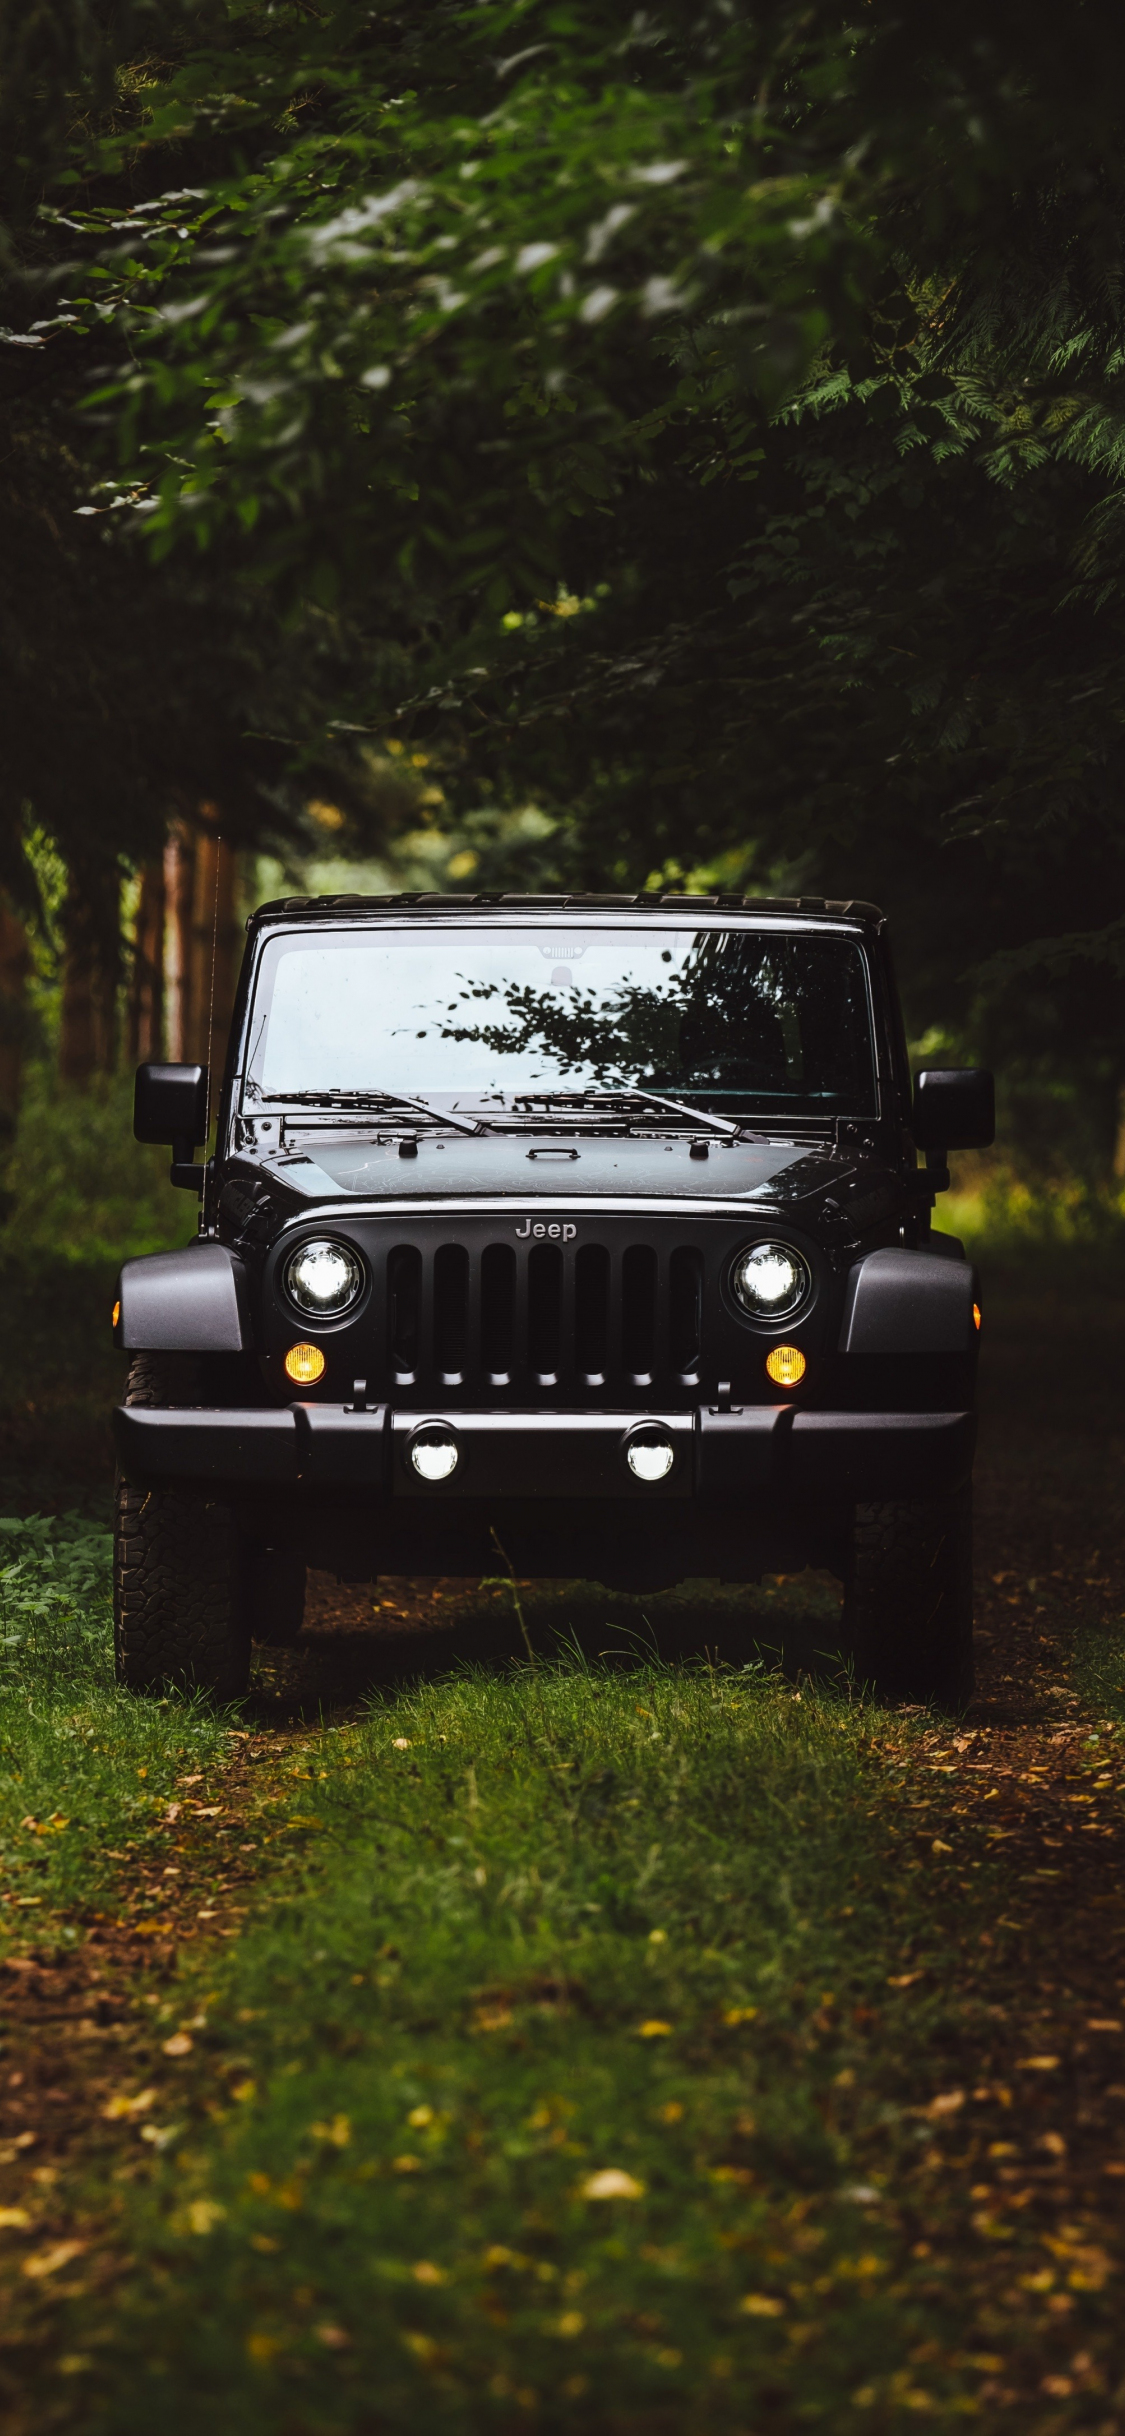 Download wallpaper 1125x2436 black jeep, forest, jeep wrangler, iphone x,  1125x2436 hd background, 2165